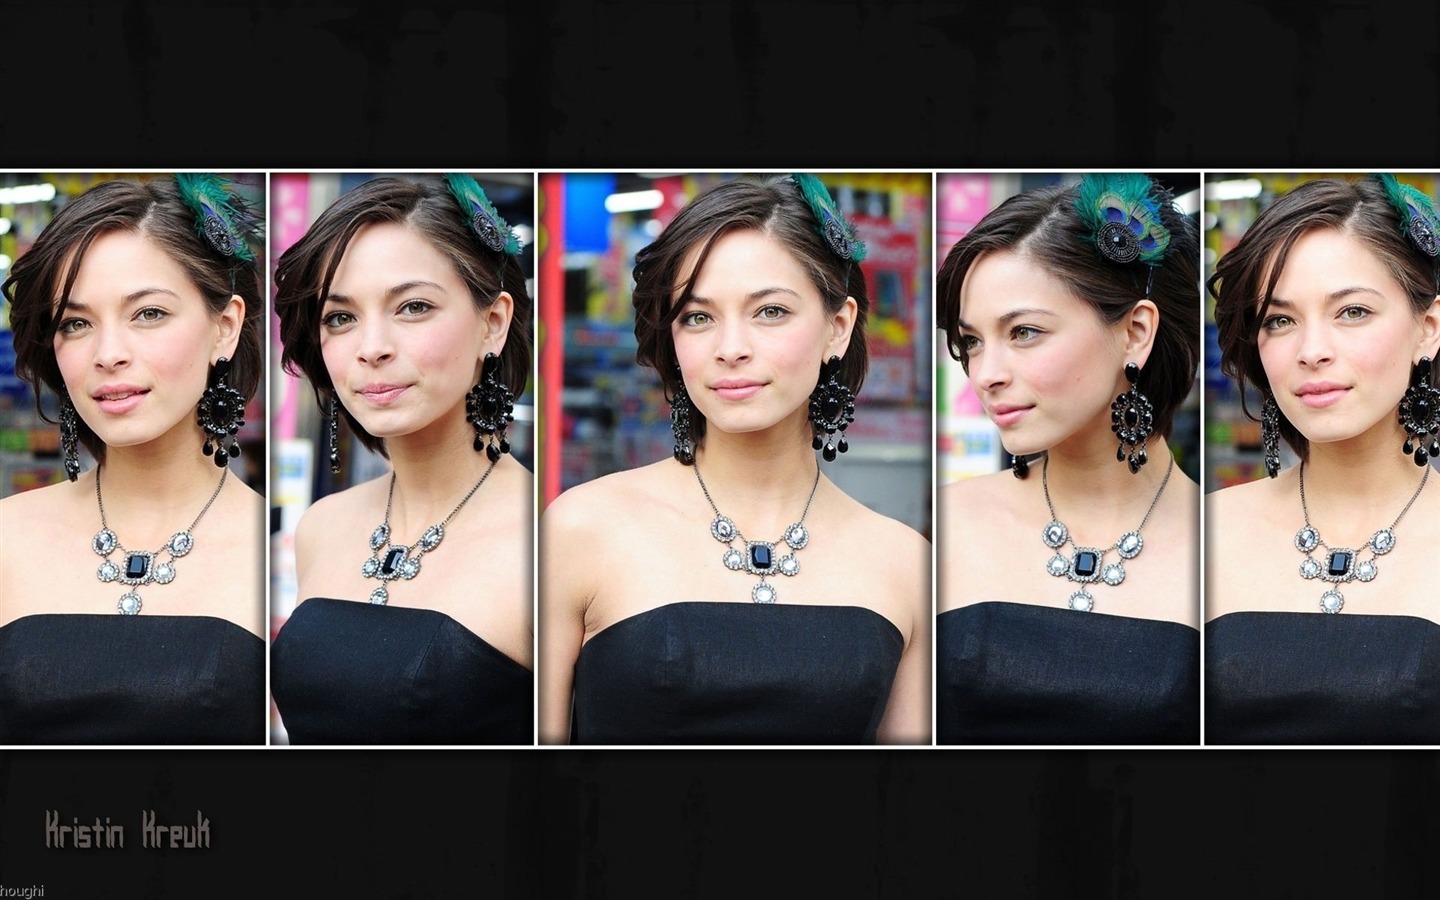 Kristin Kreuk #015 - 1440x900 Wallpapers Pictures Photos Images